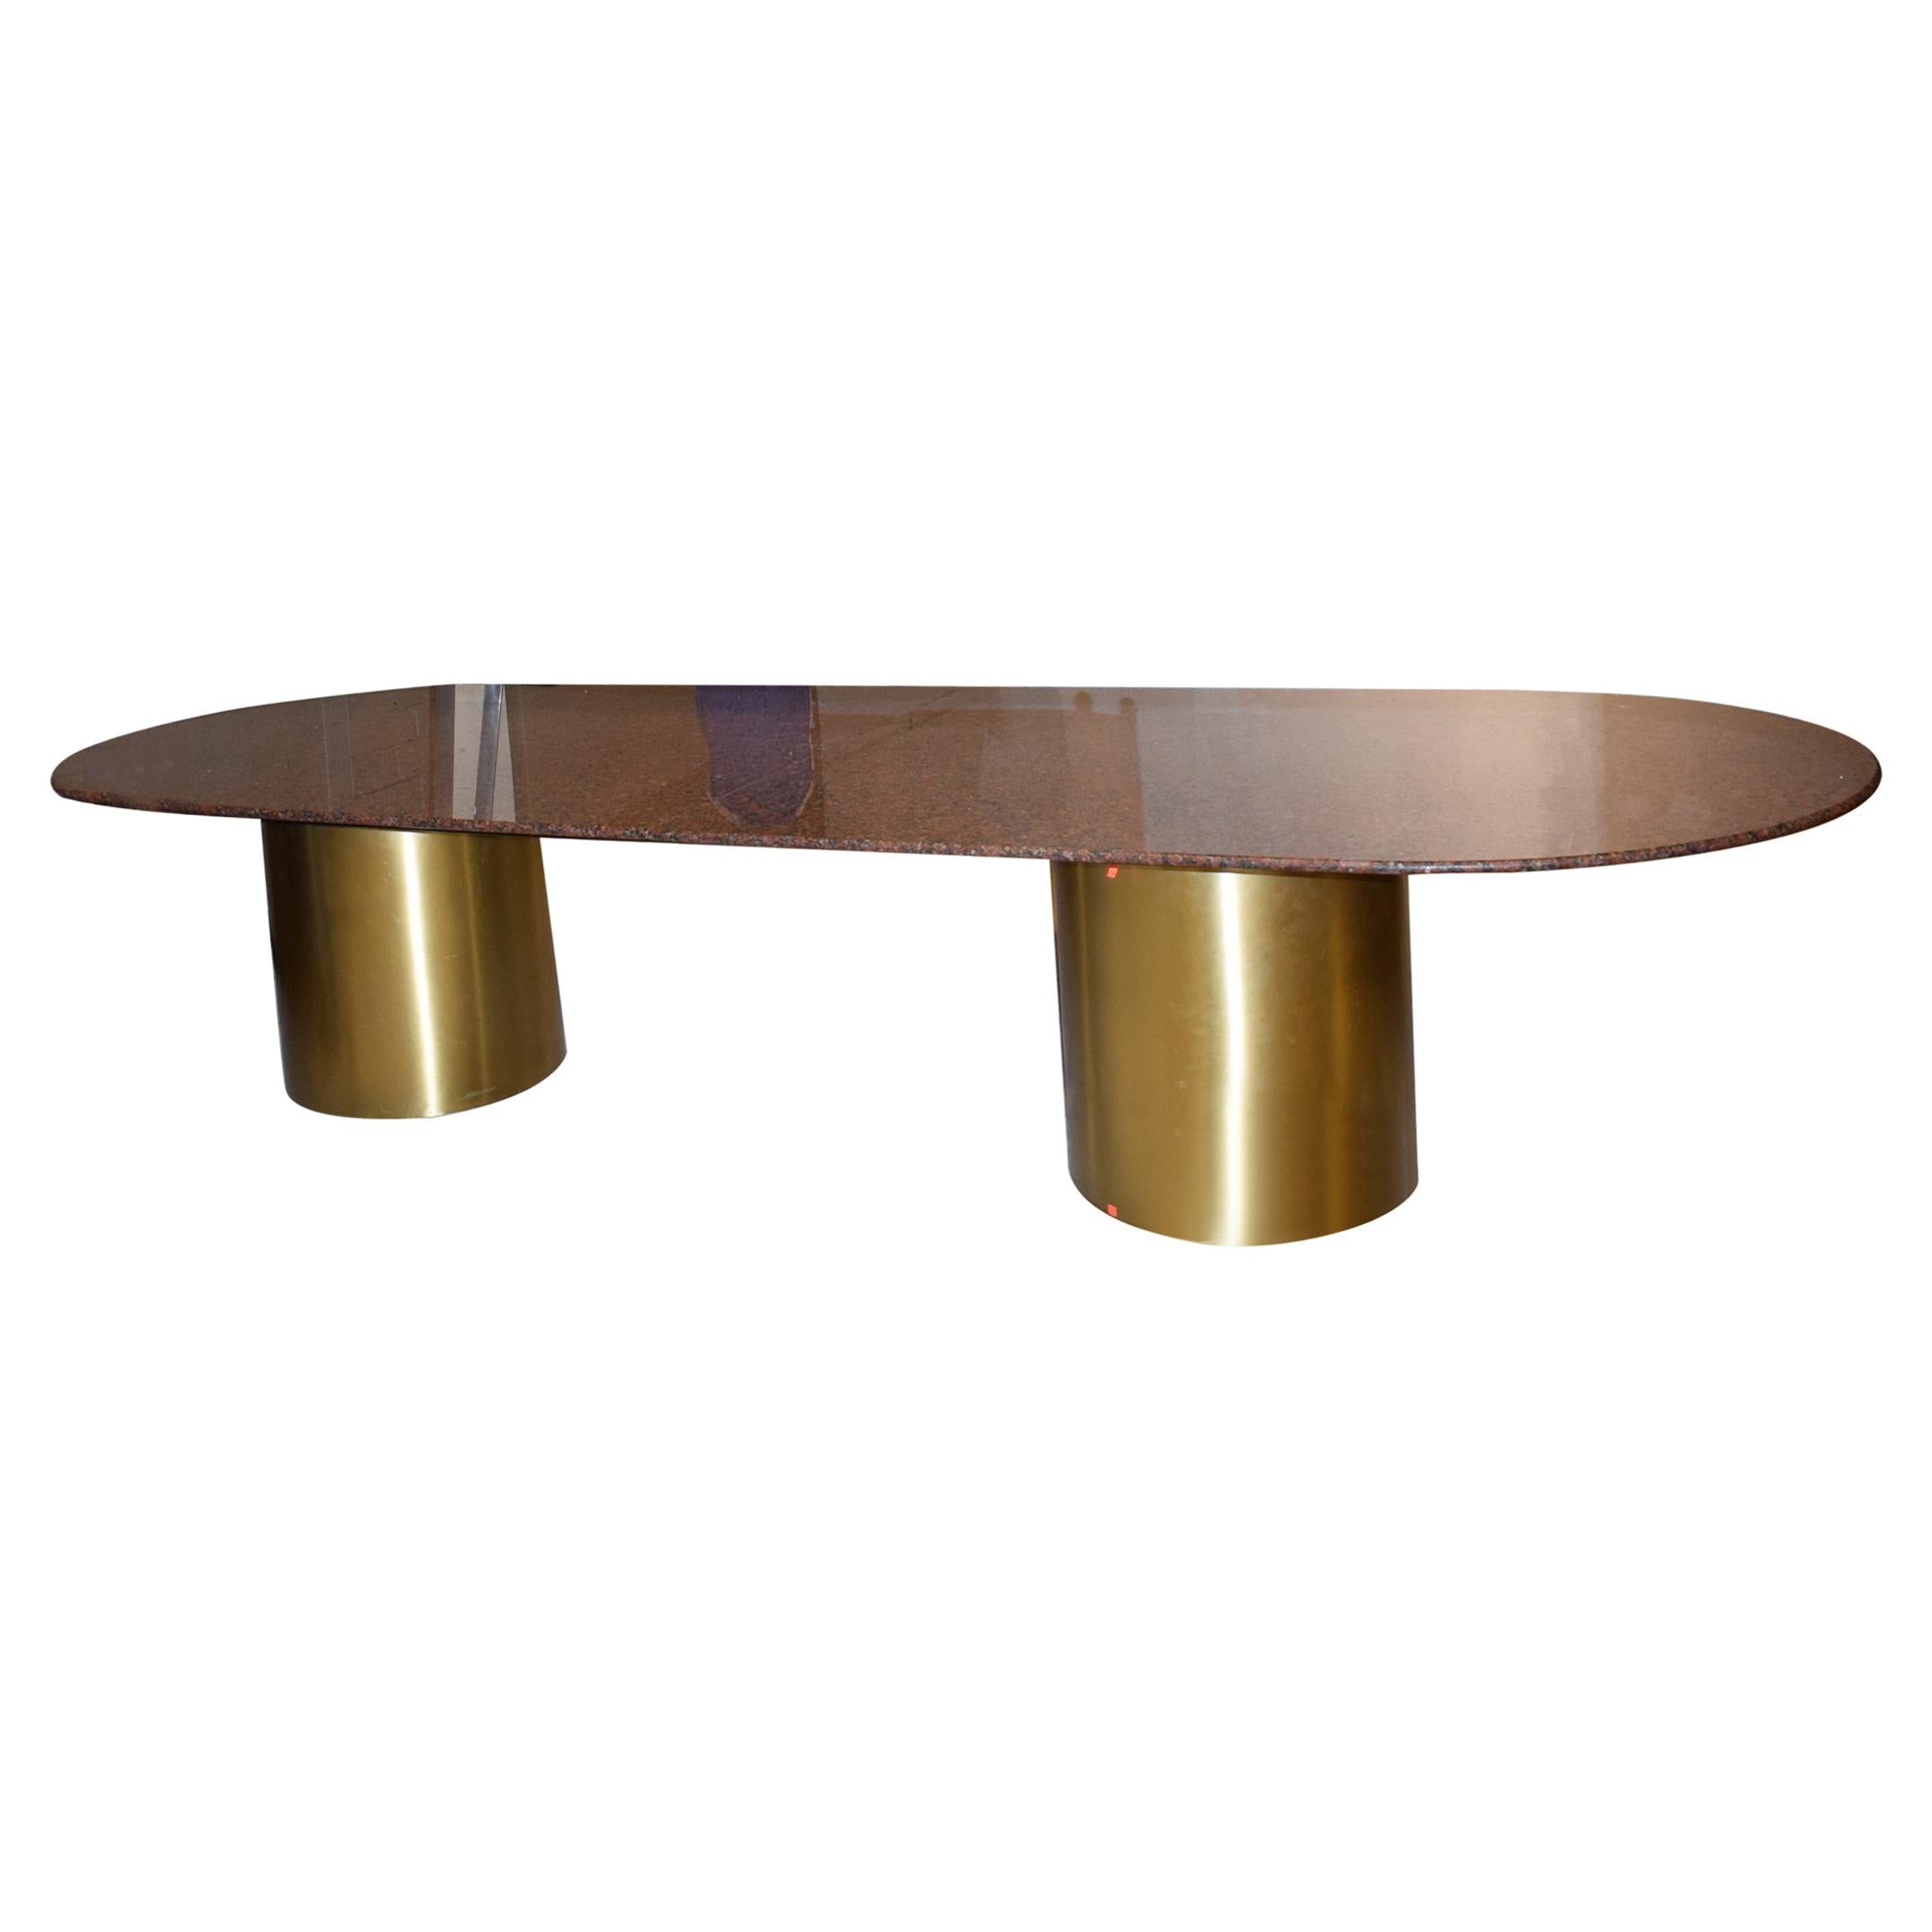 Red Granite Conference Table